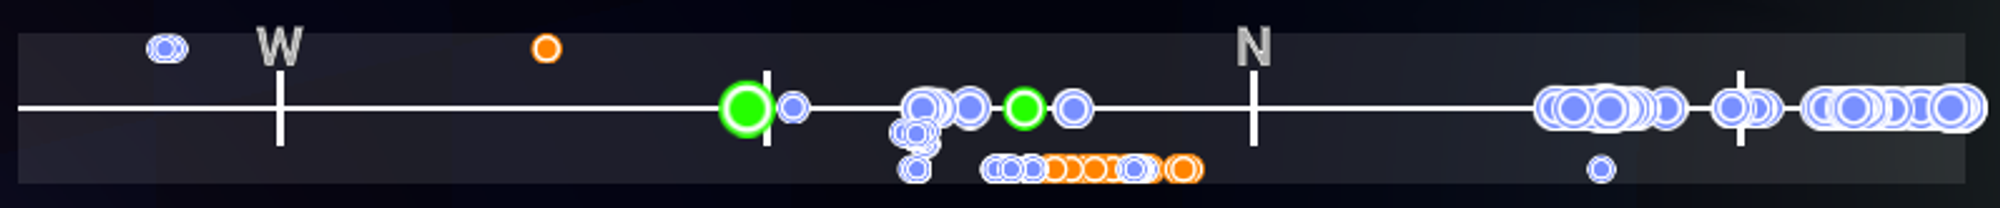 Multi-level dungeon.  One hostile (orange) blip is on a level above me, and some number of blue pickups.  There are a few friendly green dots on the same level as me along with a lot of blue pickups, and the most of the orange enemies are in the level below me.  